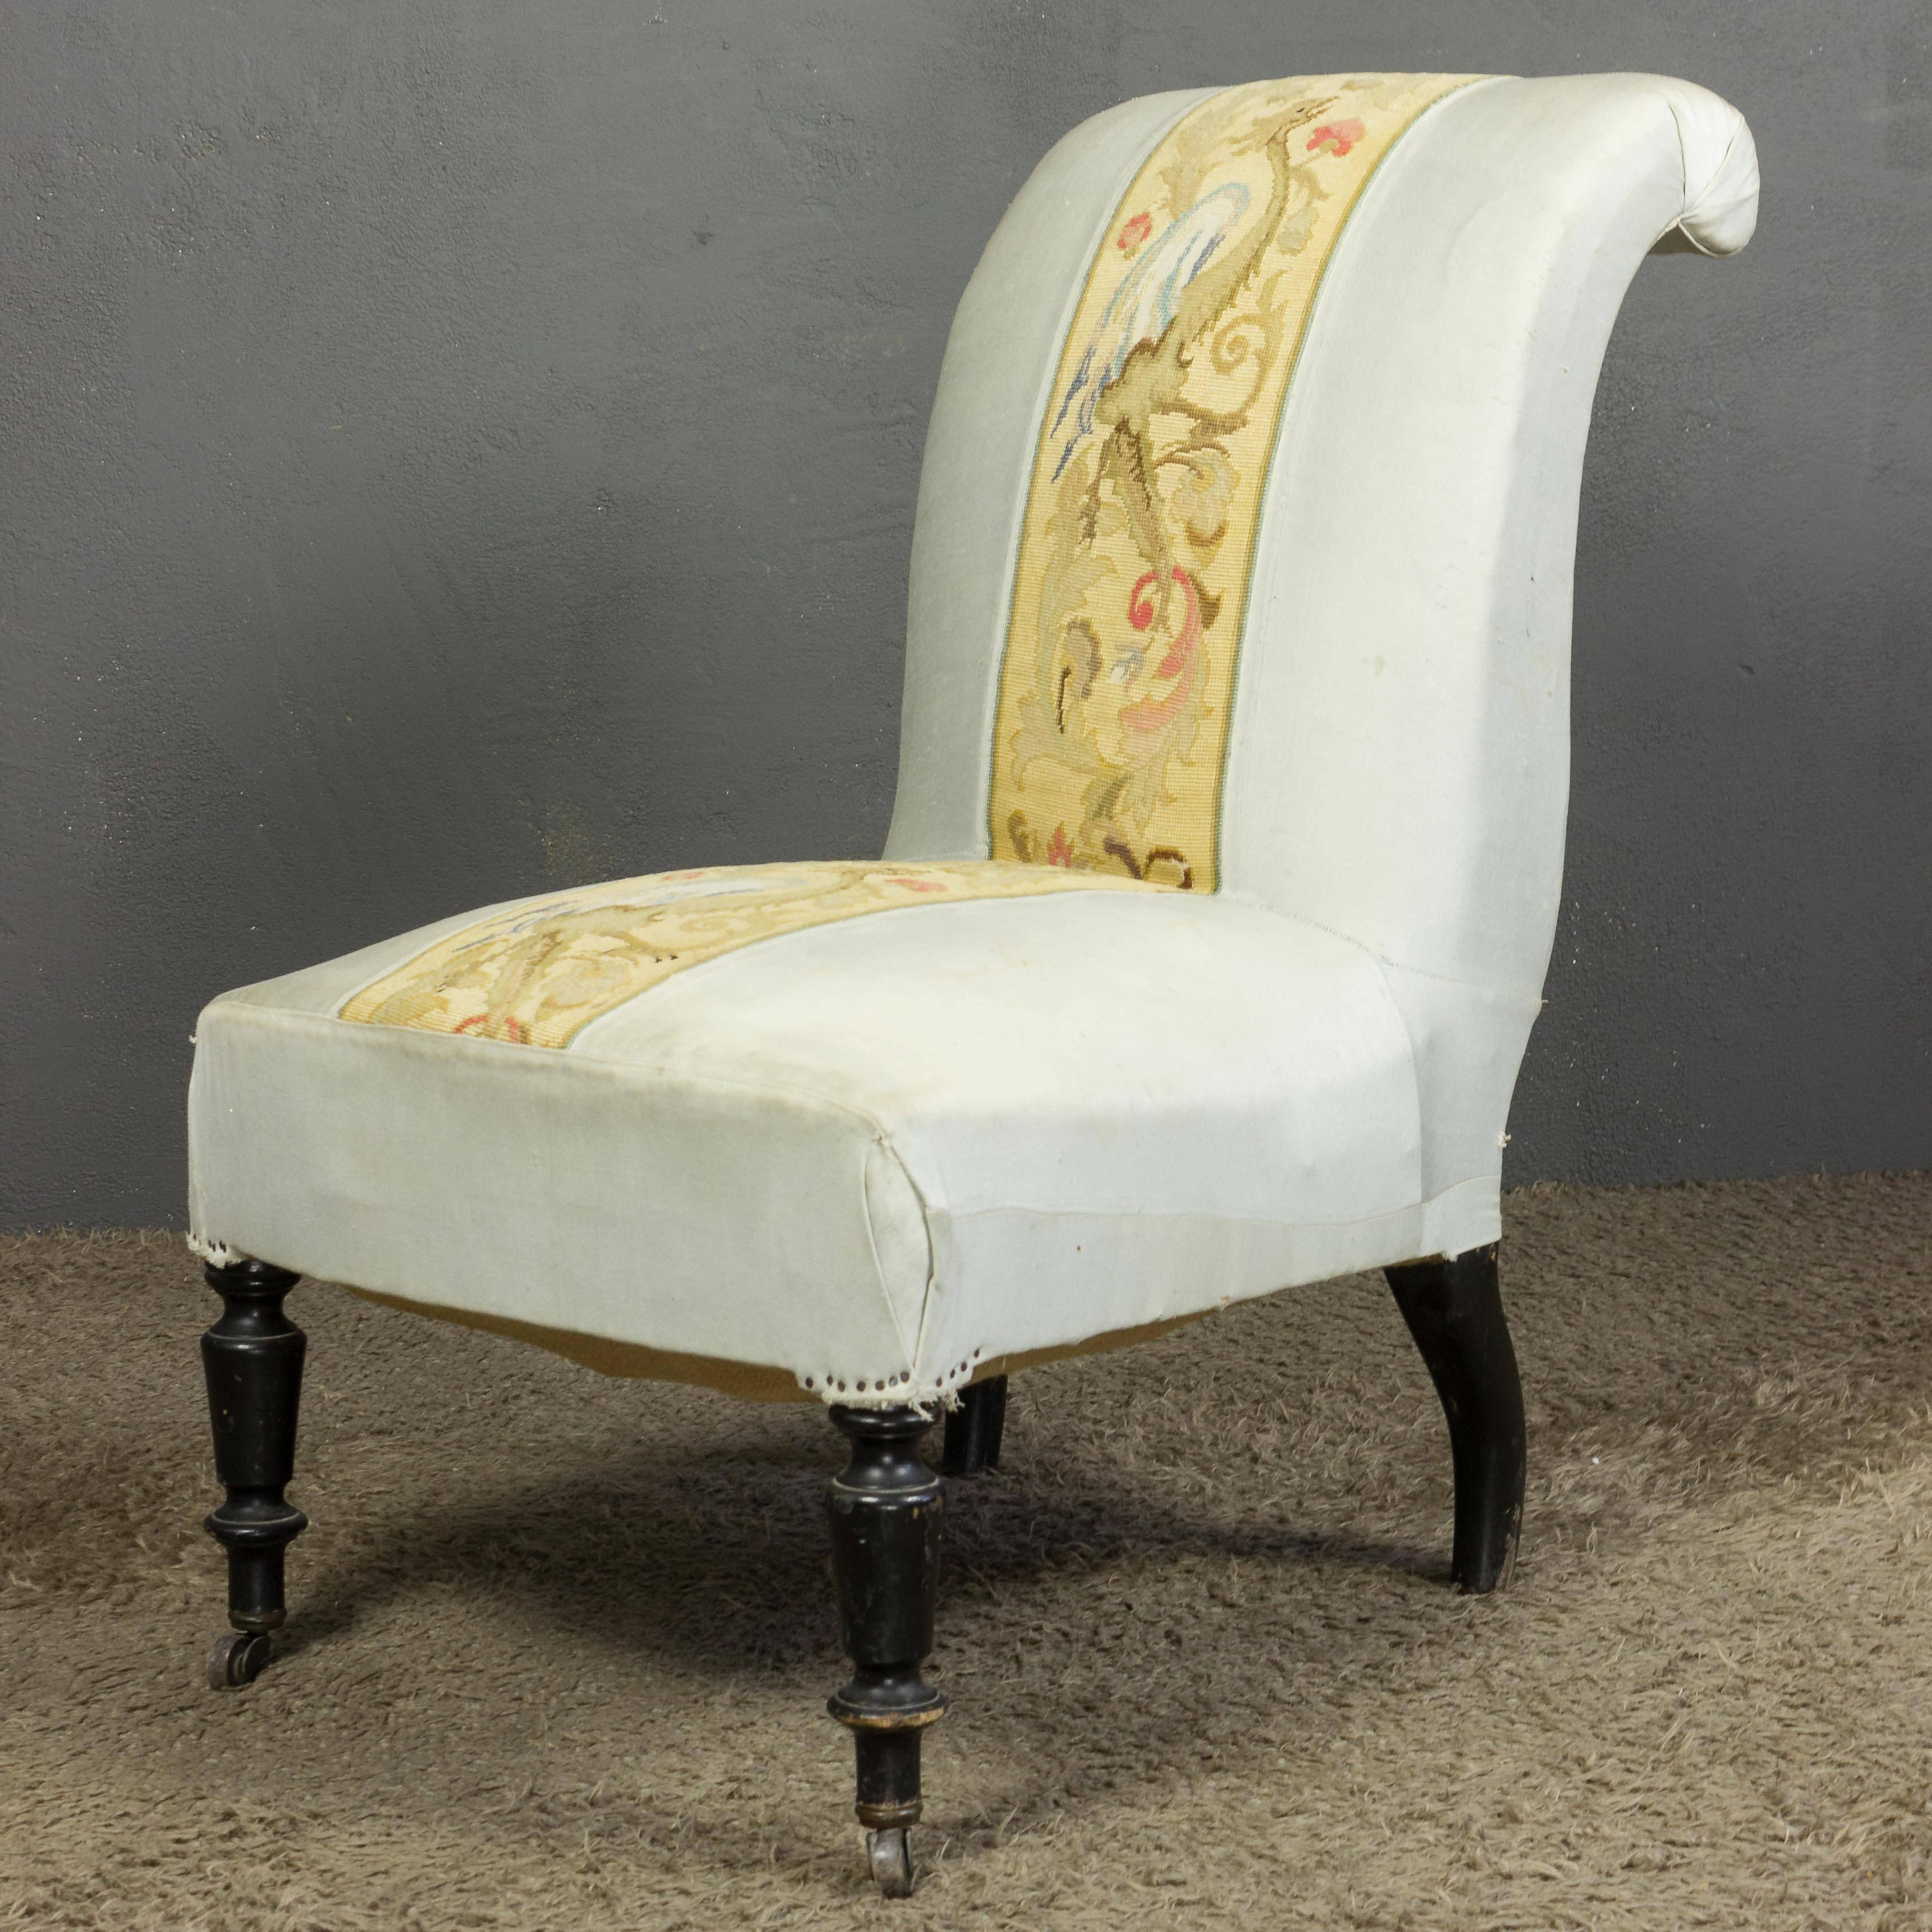 French Scrolled Back Slipper Chair with Embroidery In Good Condition For Sale In Buchanan, NY